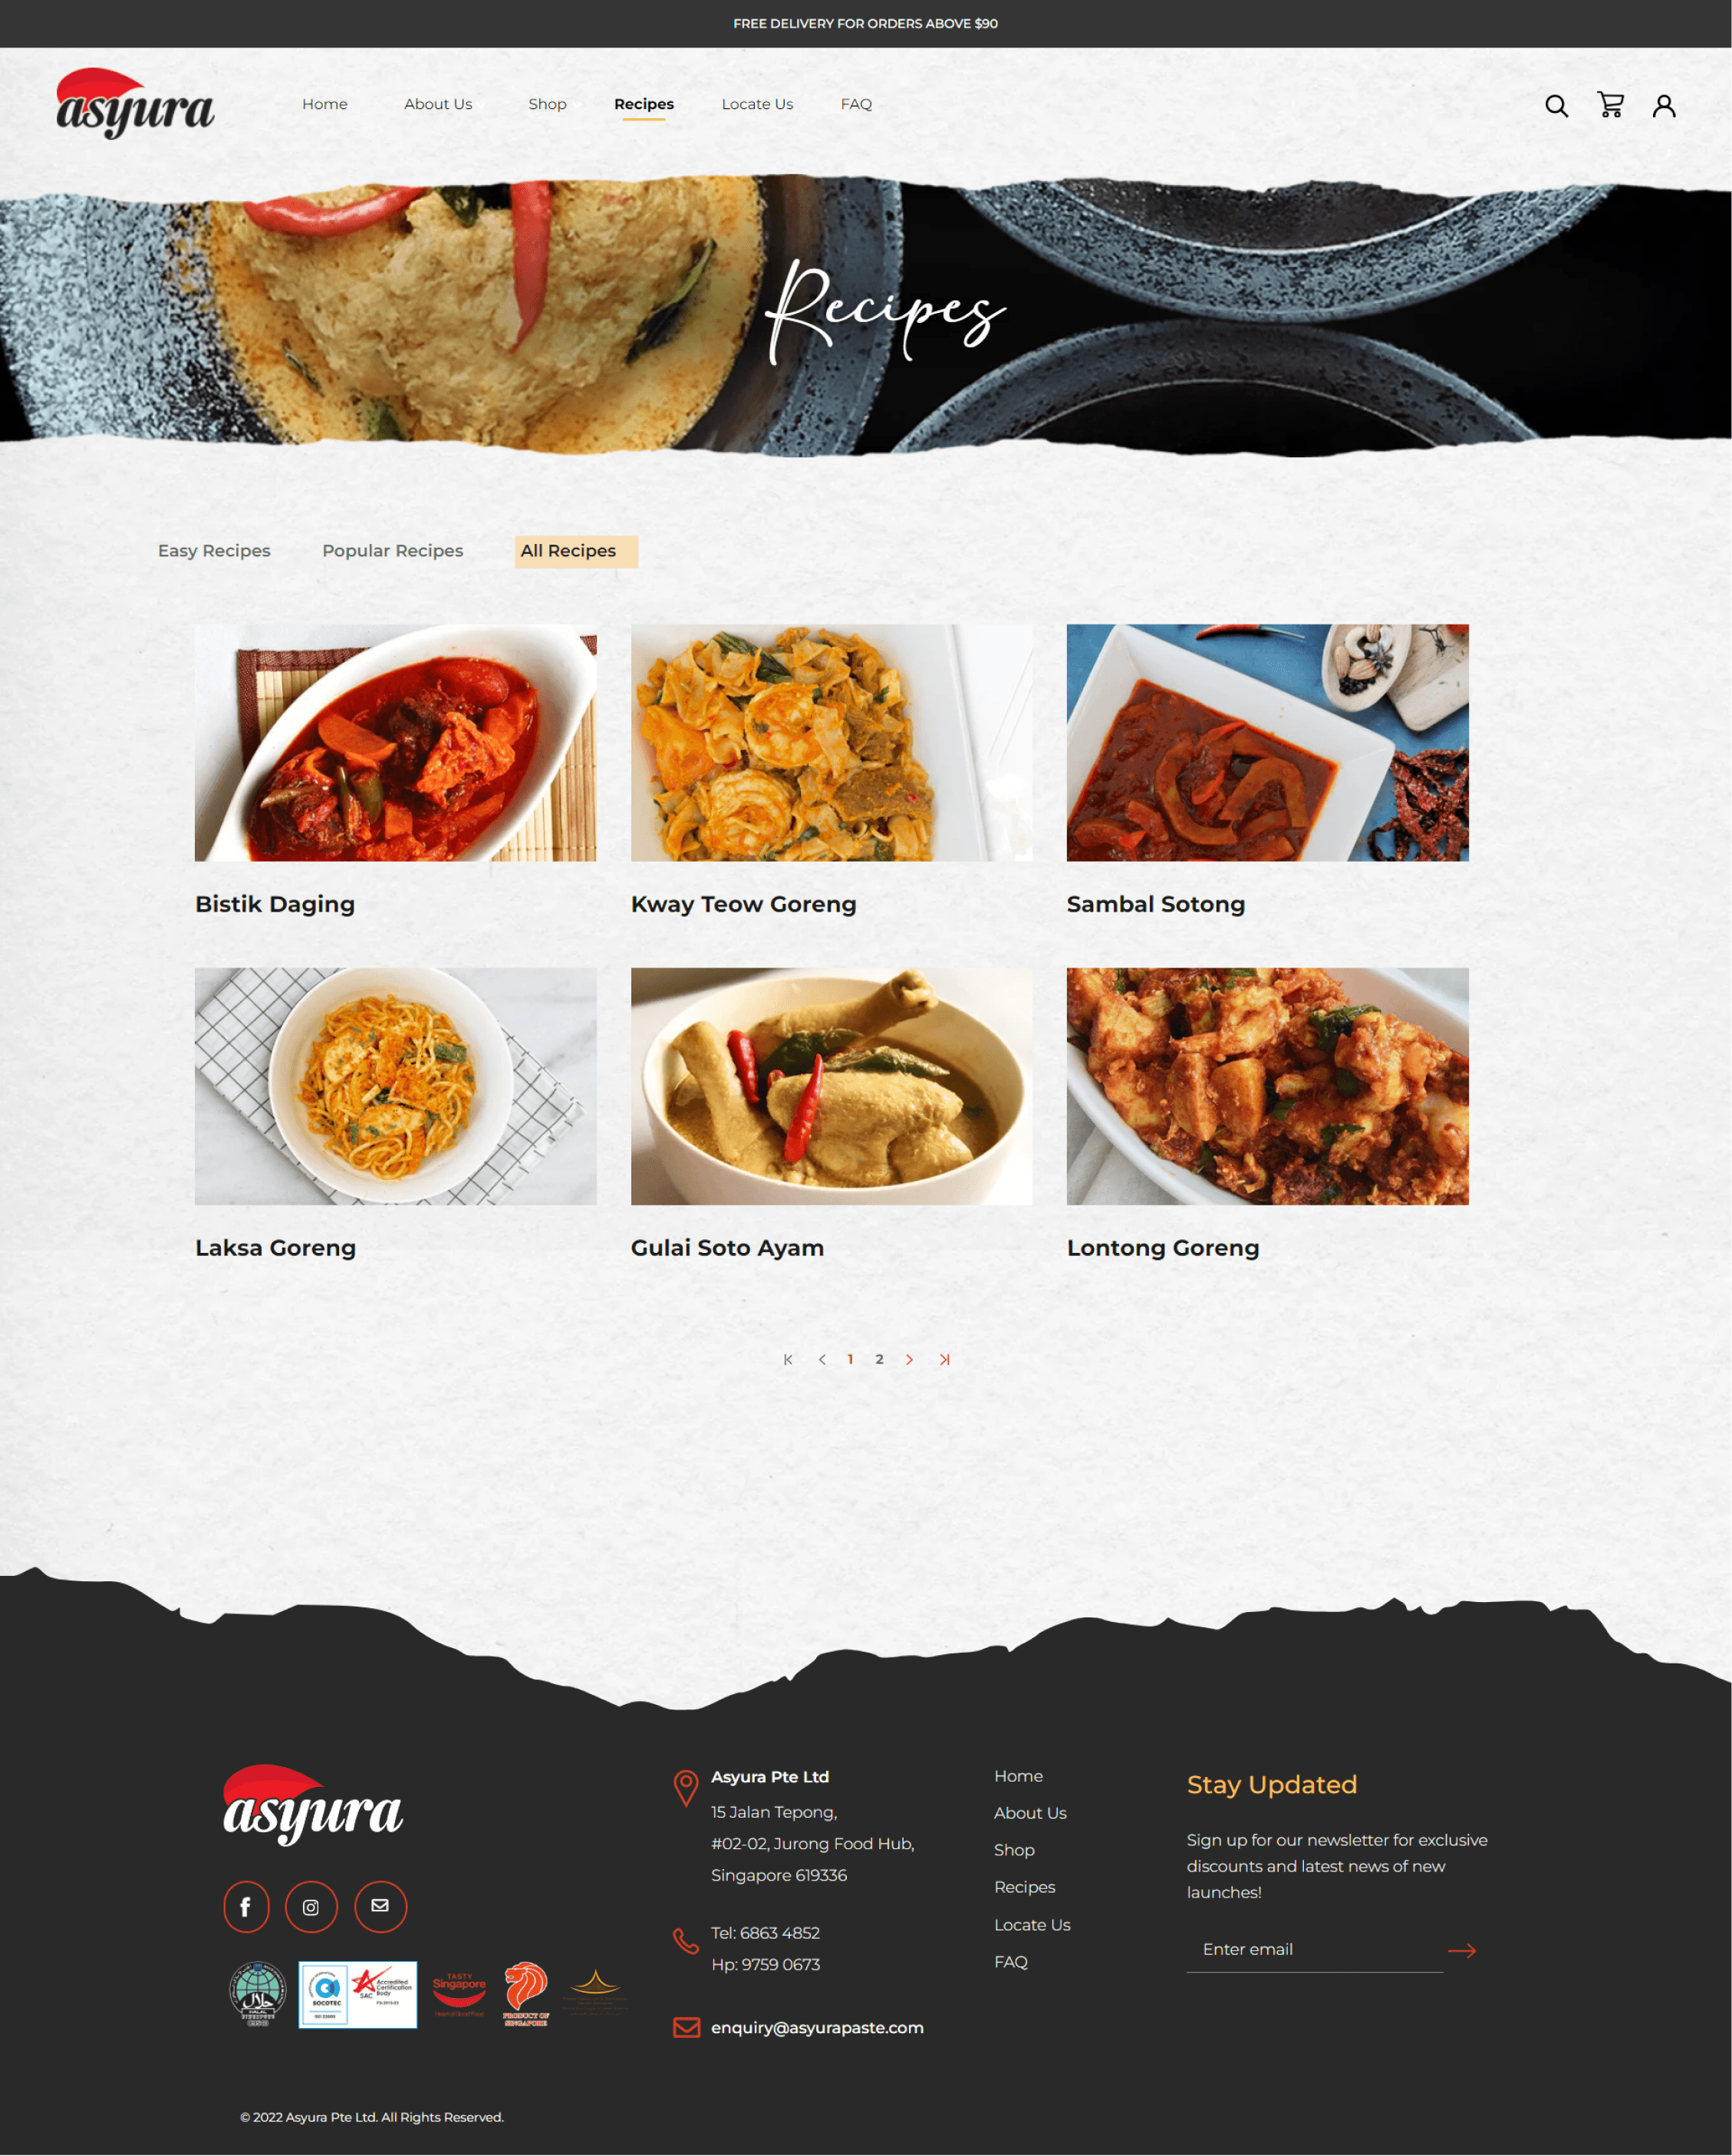 PDP - Recipes Page